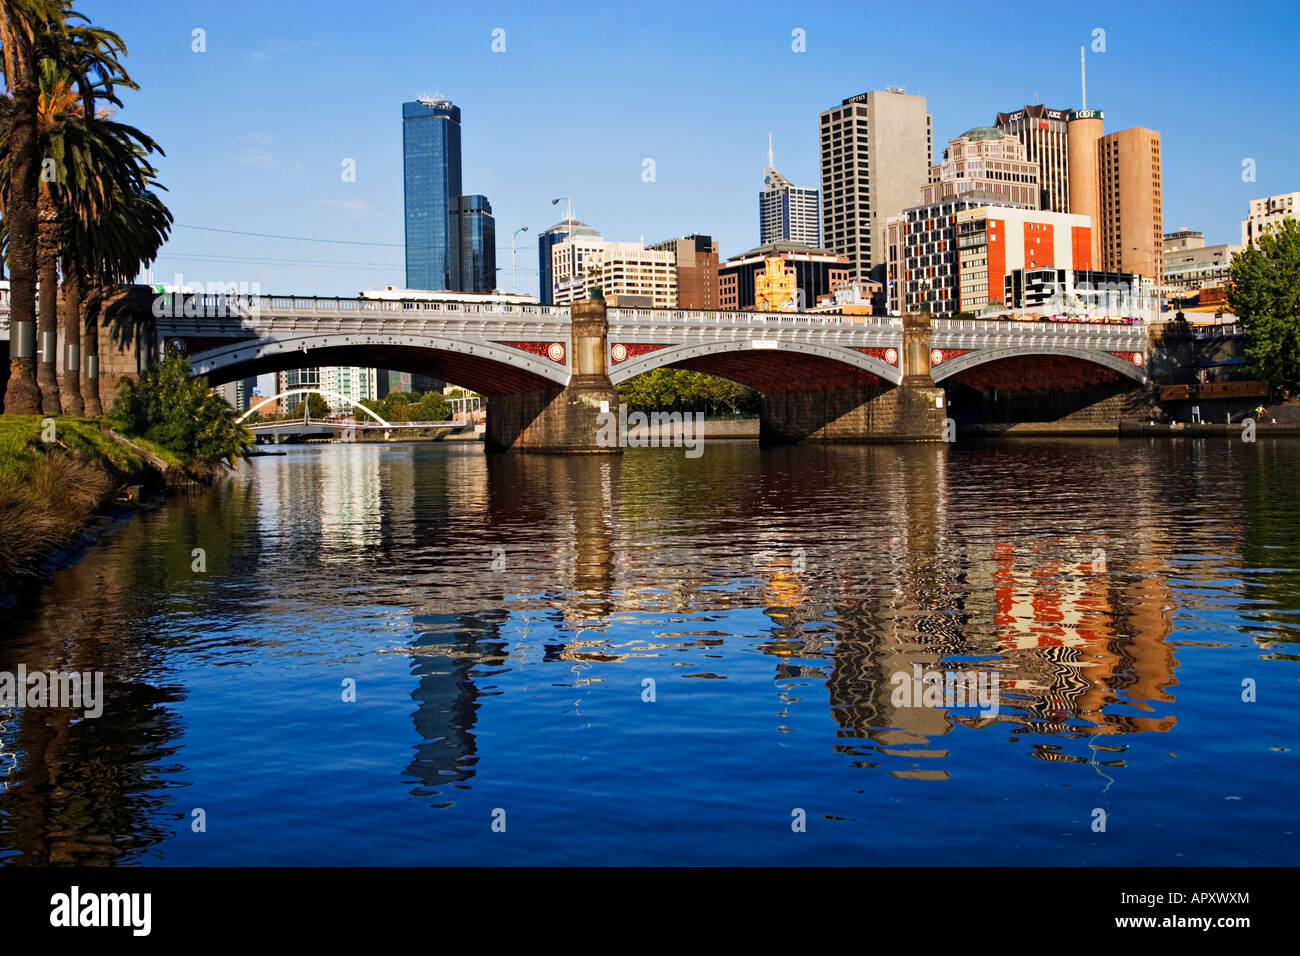 Melbourne Skyline / Scenic views of the Yarra River and the historic Princes Bridge. Stock Photo